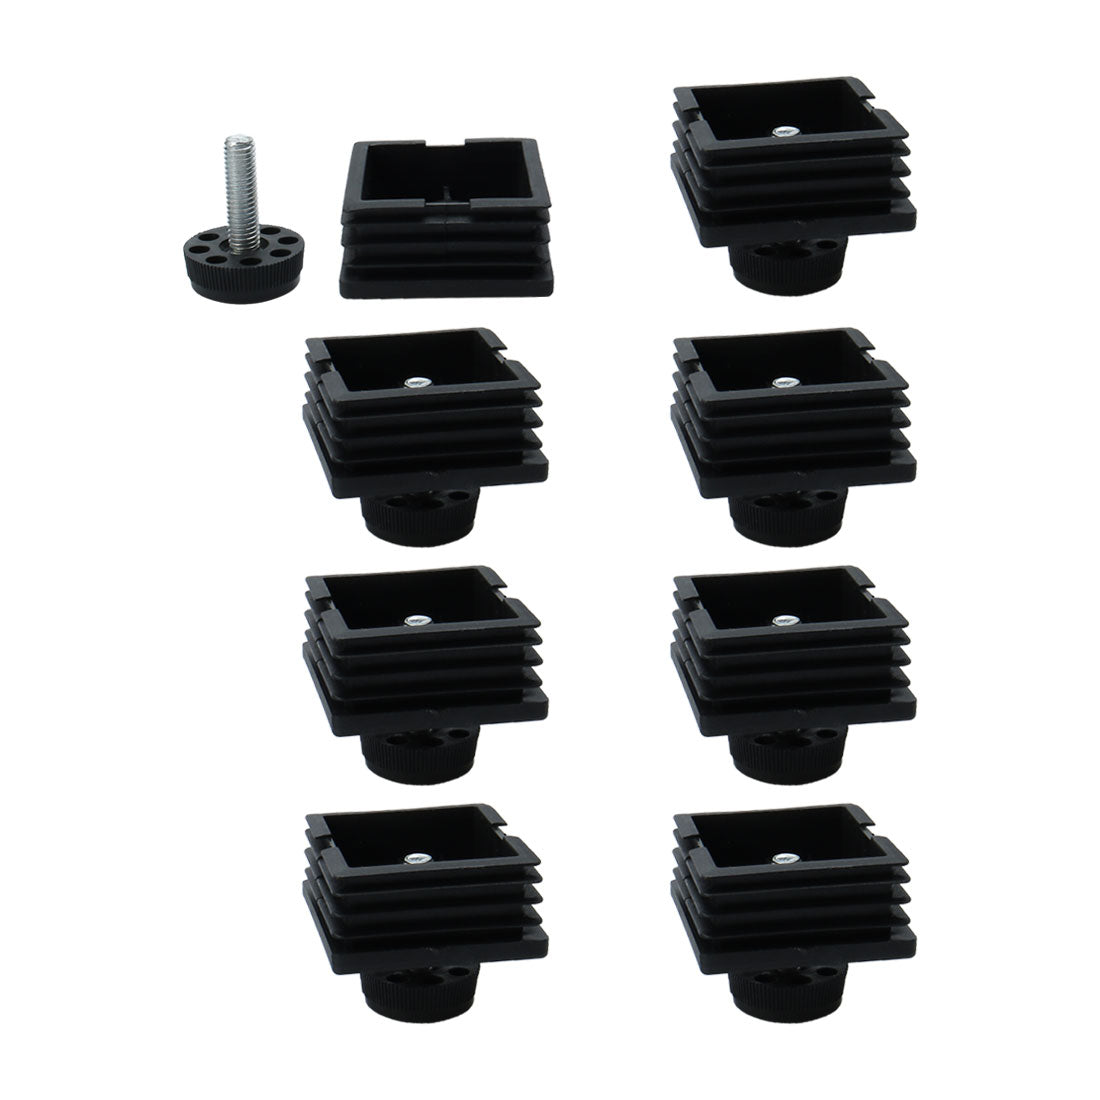 uxcell Uxcell Adjustable Leveling Feet 50 x 50mm Square Insert Furniture Glide 8 Sets